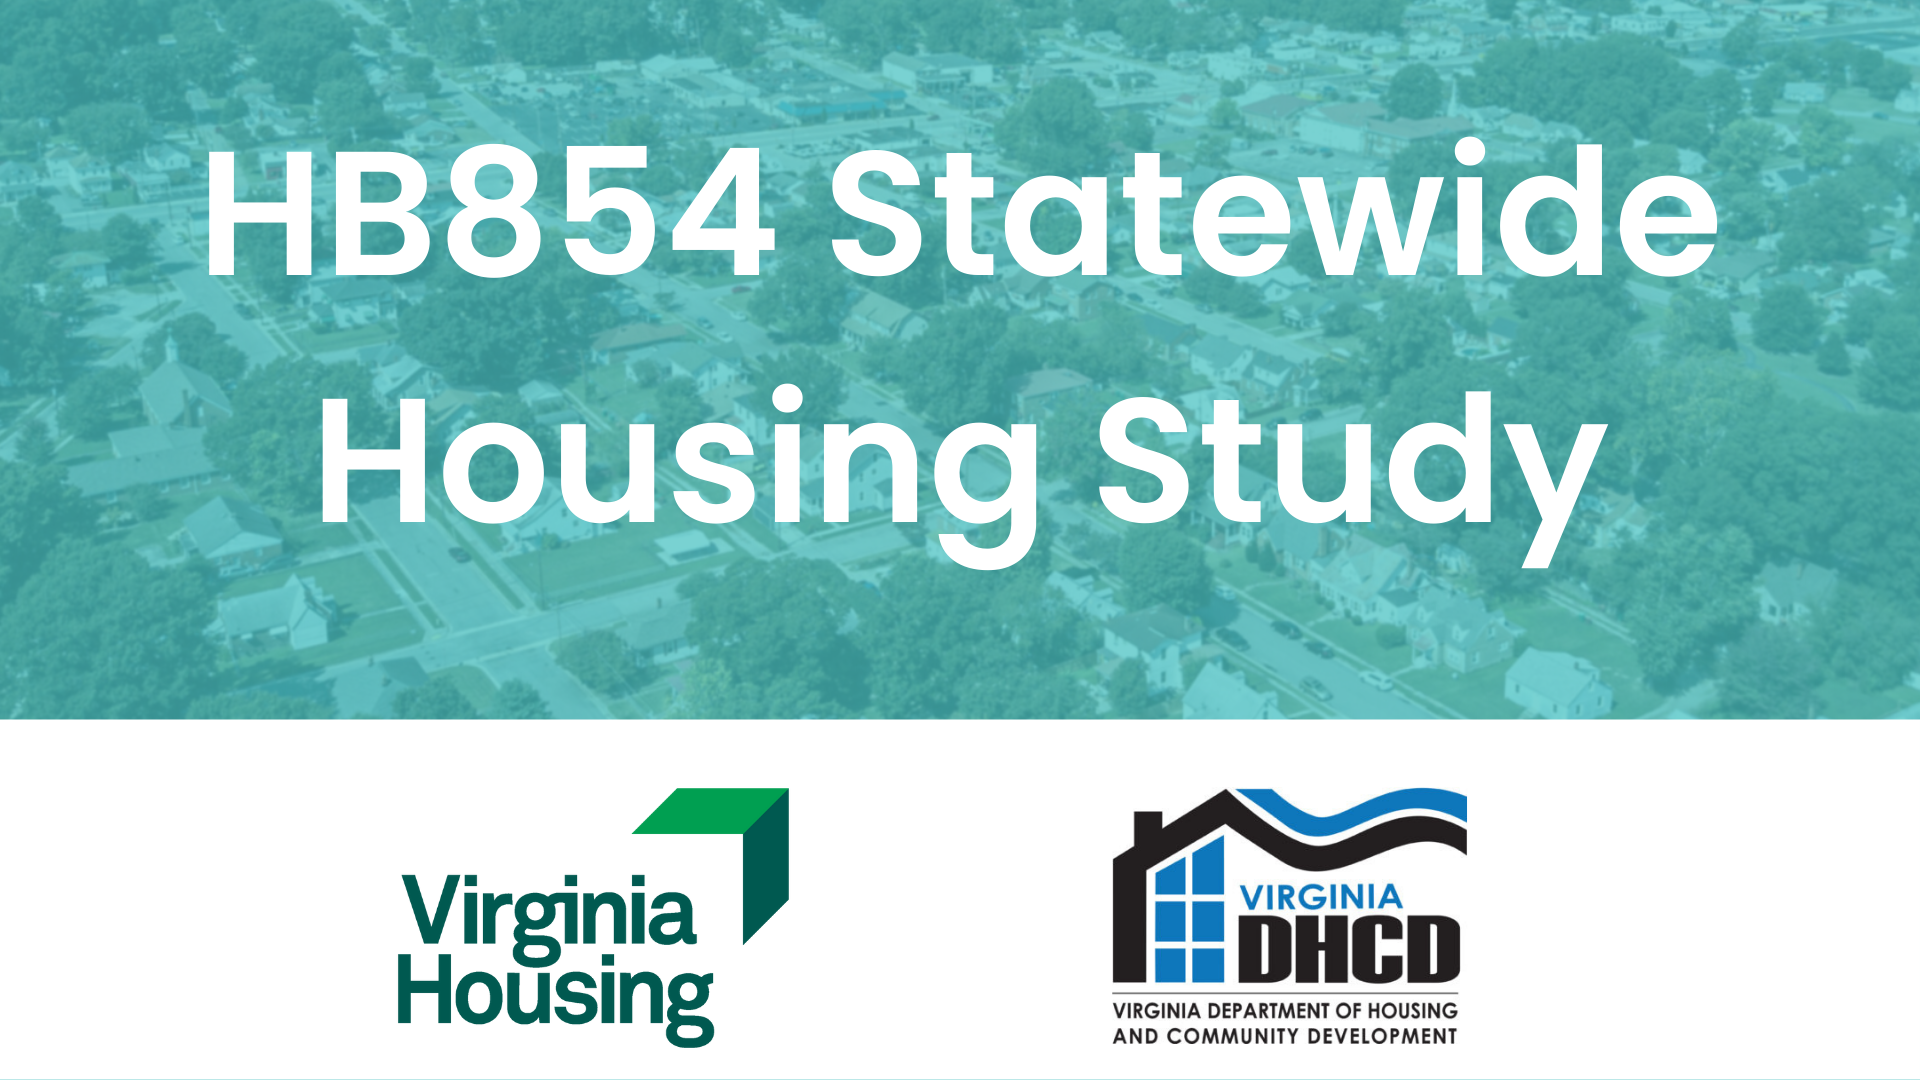 H.B. 854 Statewide Housing Study; Virginia Housing and the Virginia Department of Housing and Community Development